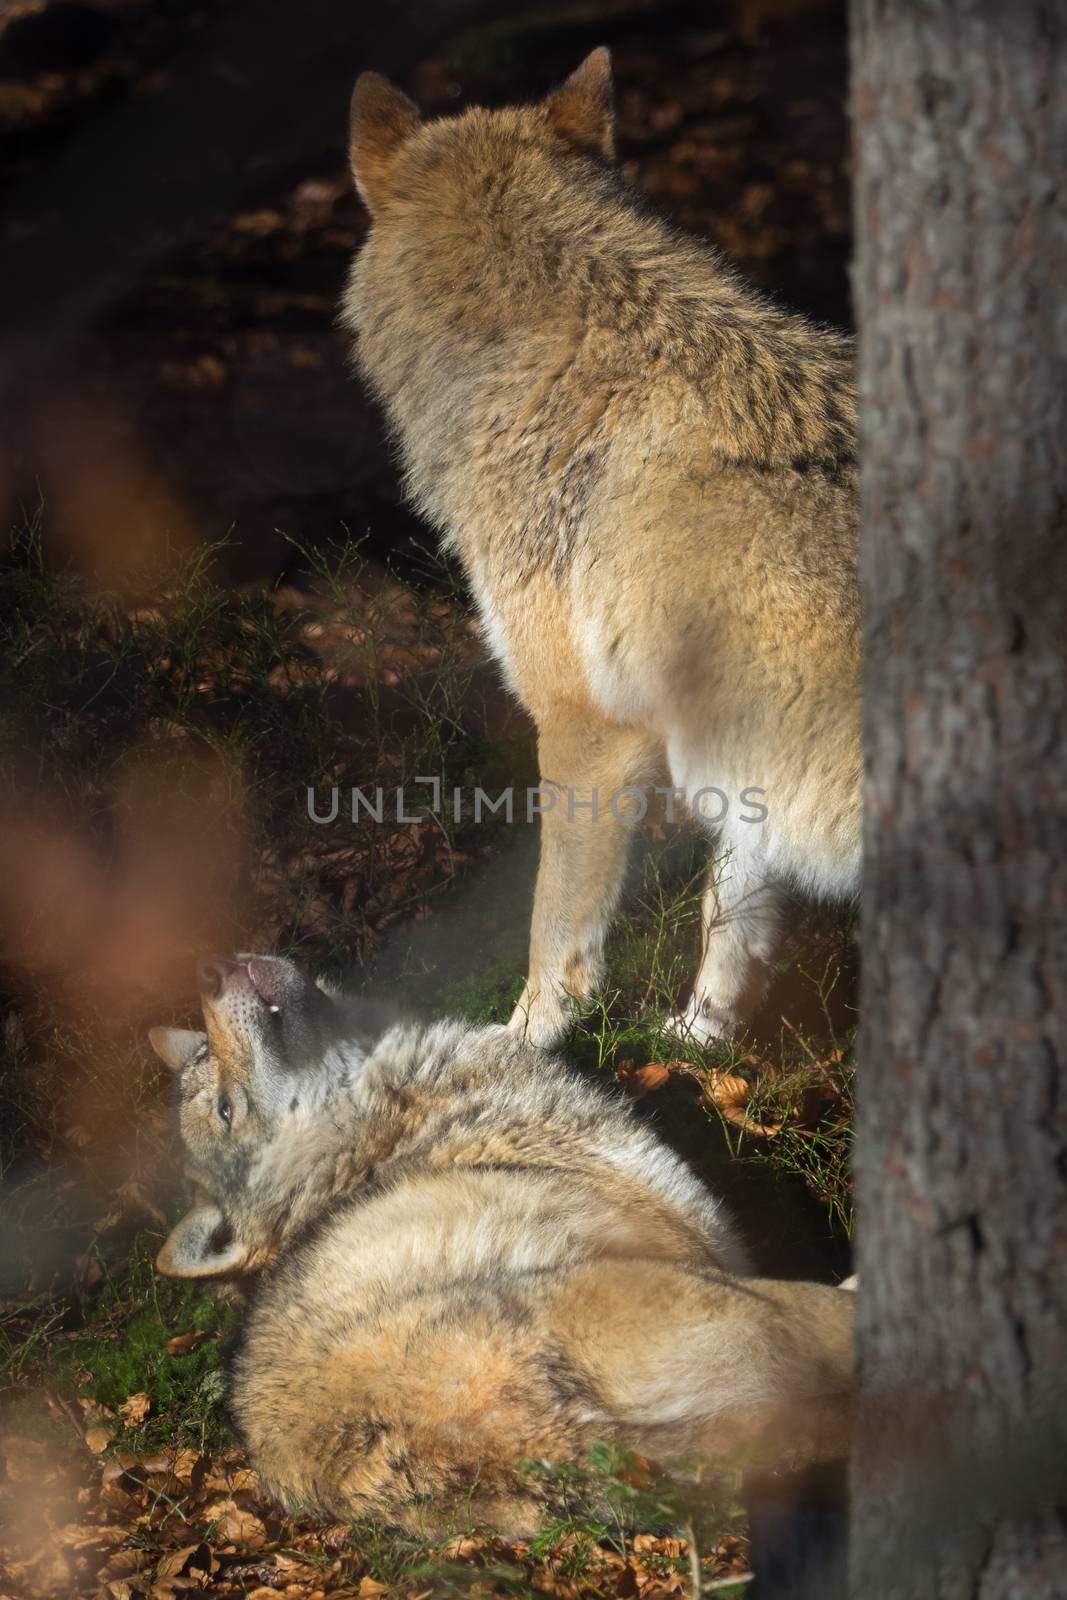 Wolves in the forest by sandra_fotodesign